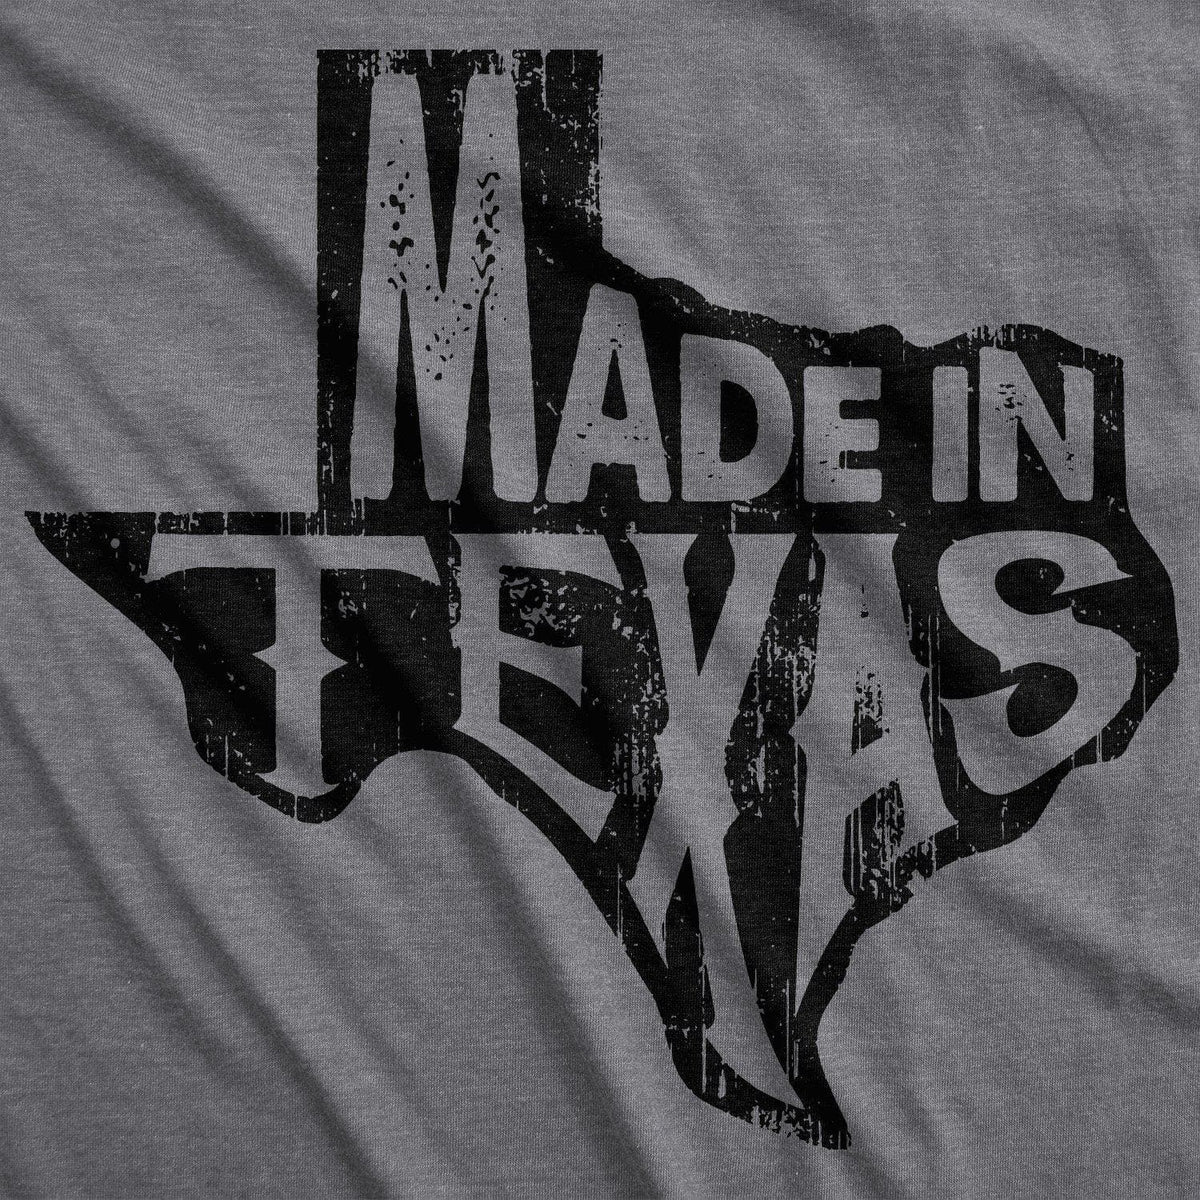 Made In Texas Women&#39;s Tshirt  -  Crazy Dog T-Shirts